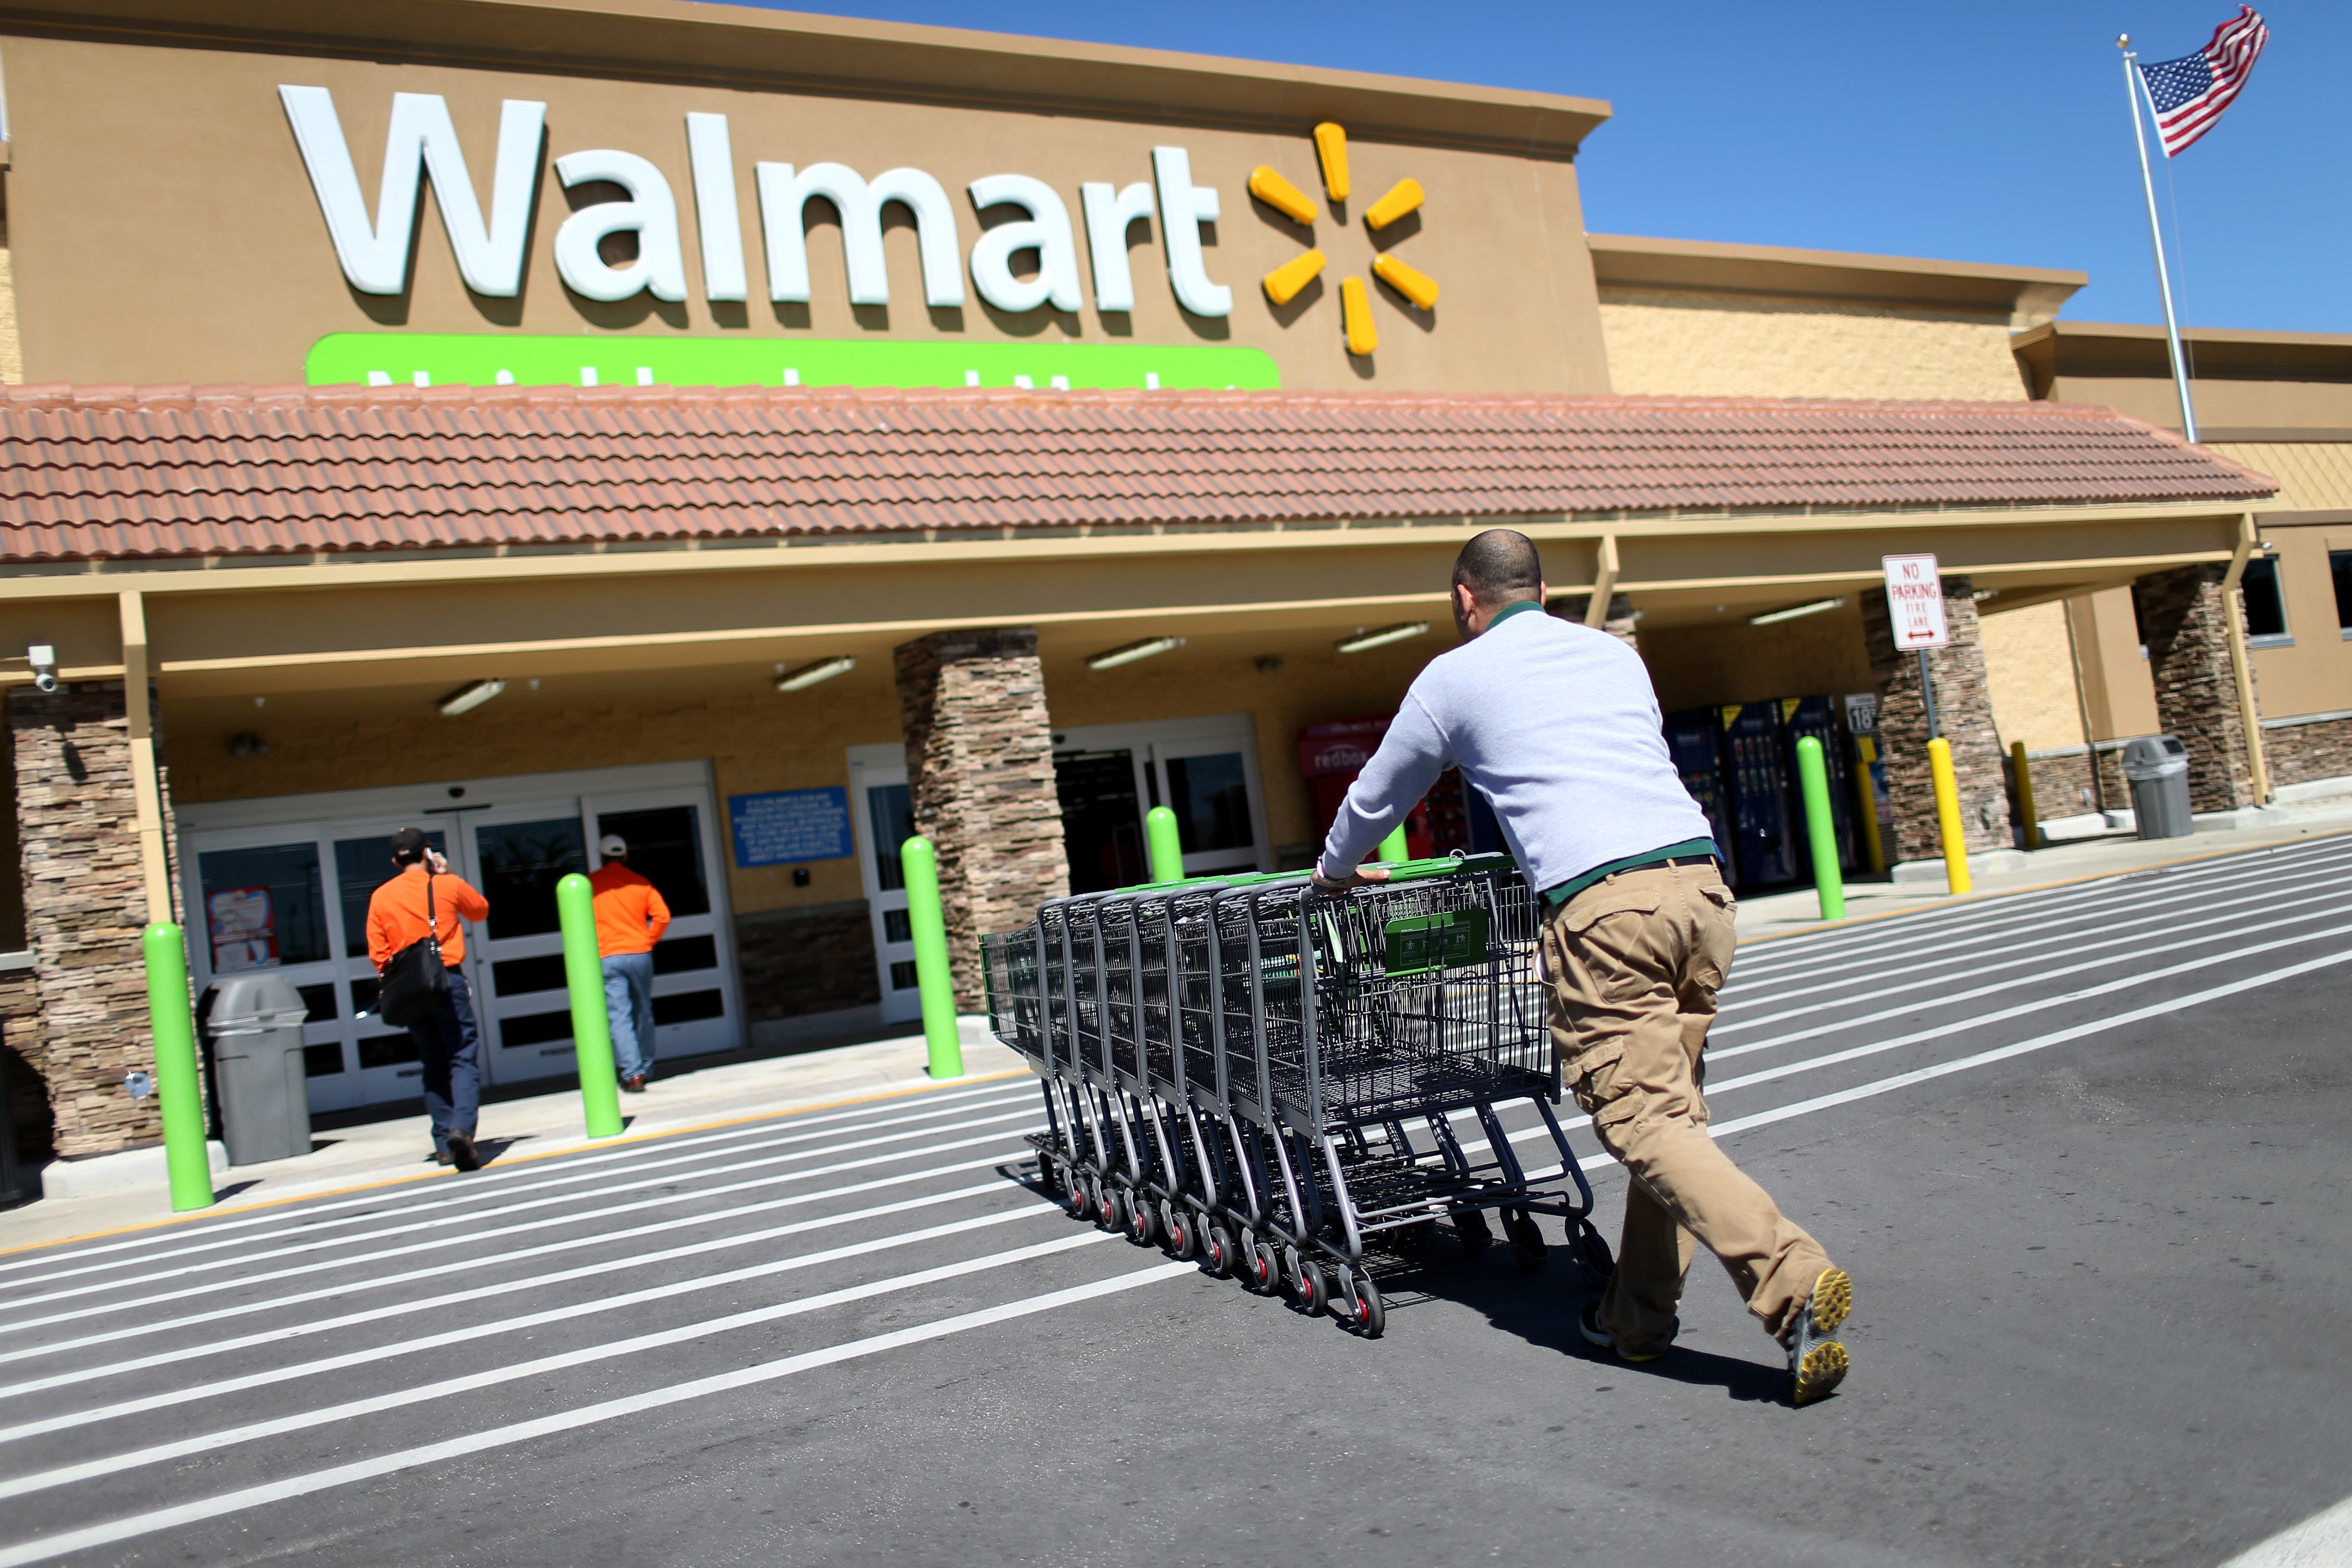 A Walmart employee pushes grocery carts at a Walmart store on February 19, 2015 in Miami, Florida. (Joe Raedle—Getty Images)